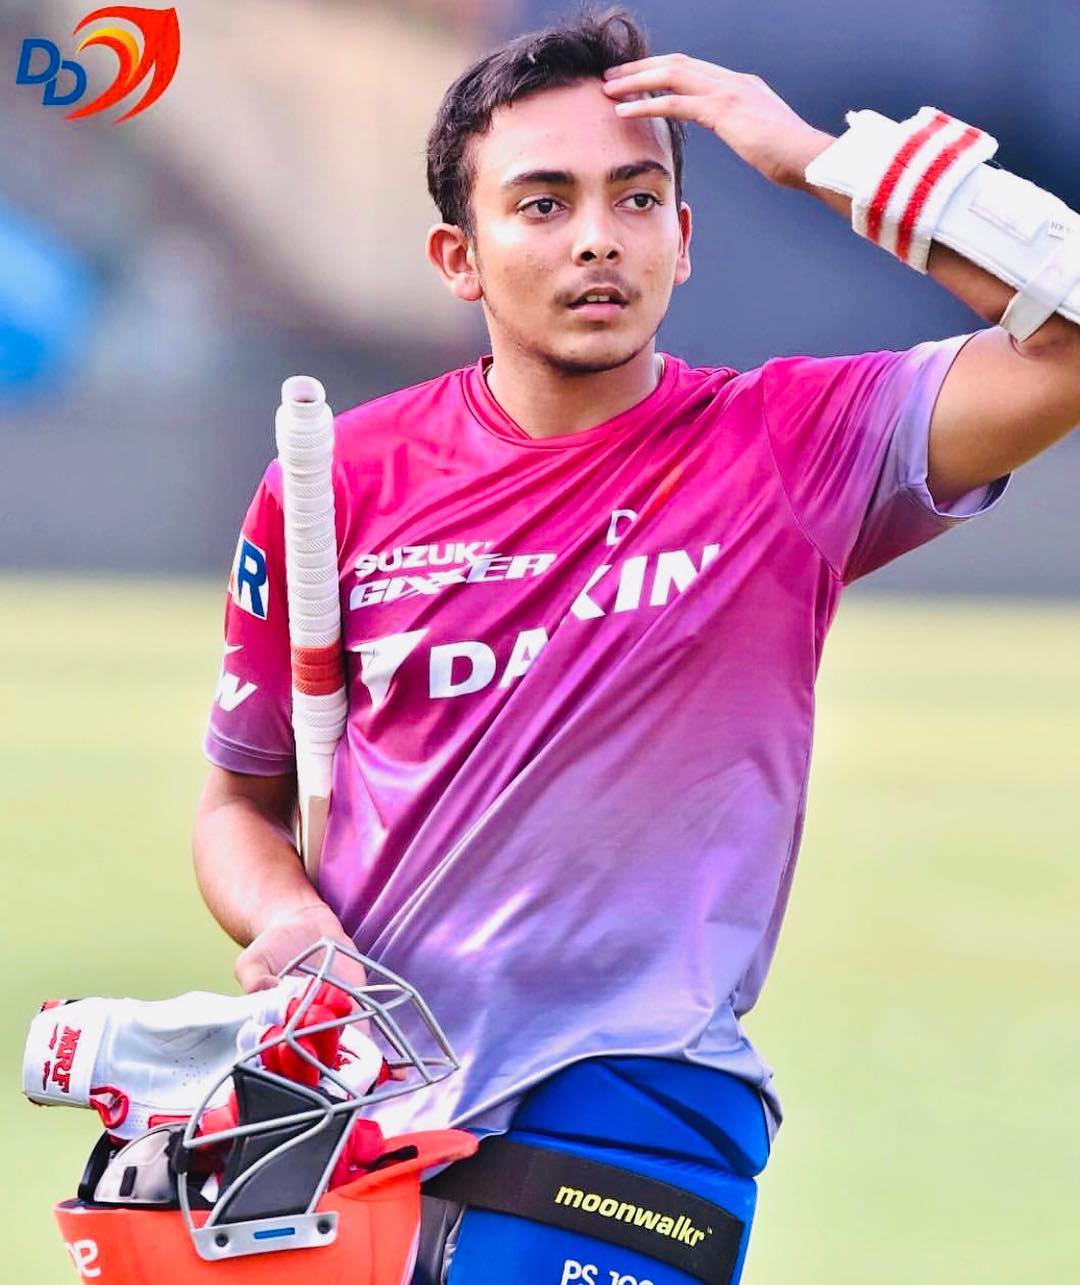 Prithvi Shaw Hairstyle 9 1 Cricketer Prithvi Shaw hairstyles | Hairstyles of Prithvi Shaw | Indian Crickter Prithvi Shaw hairstyles Prithvi Shaw Hairstyles